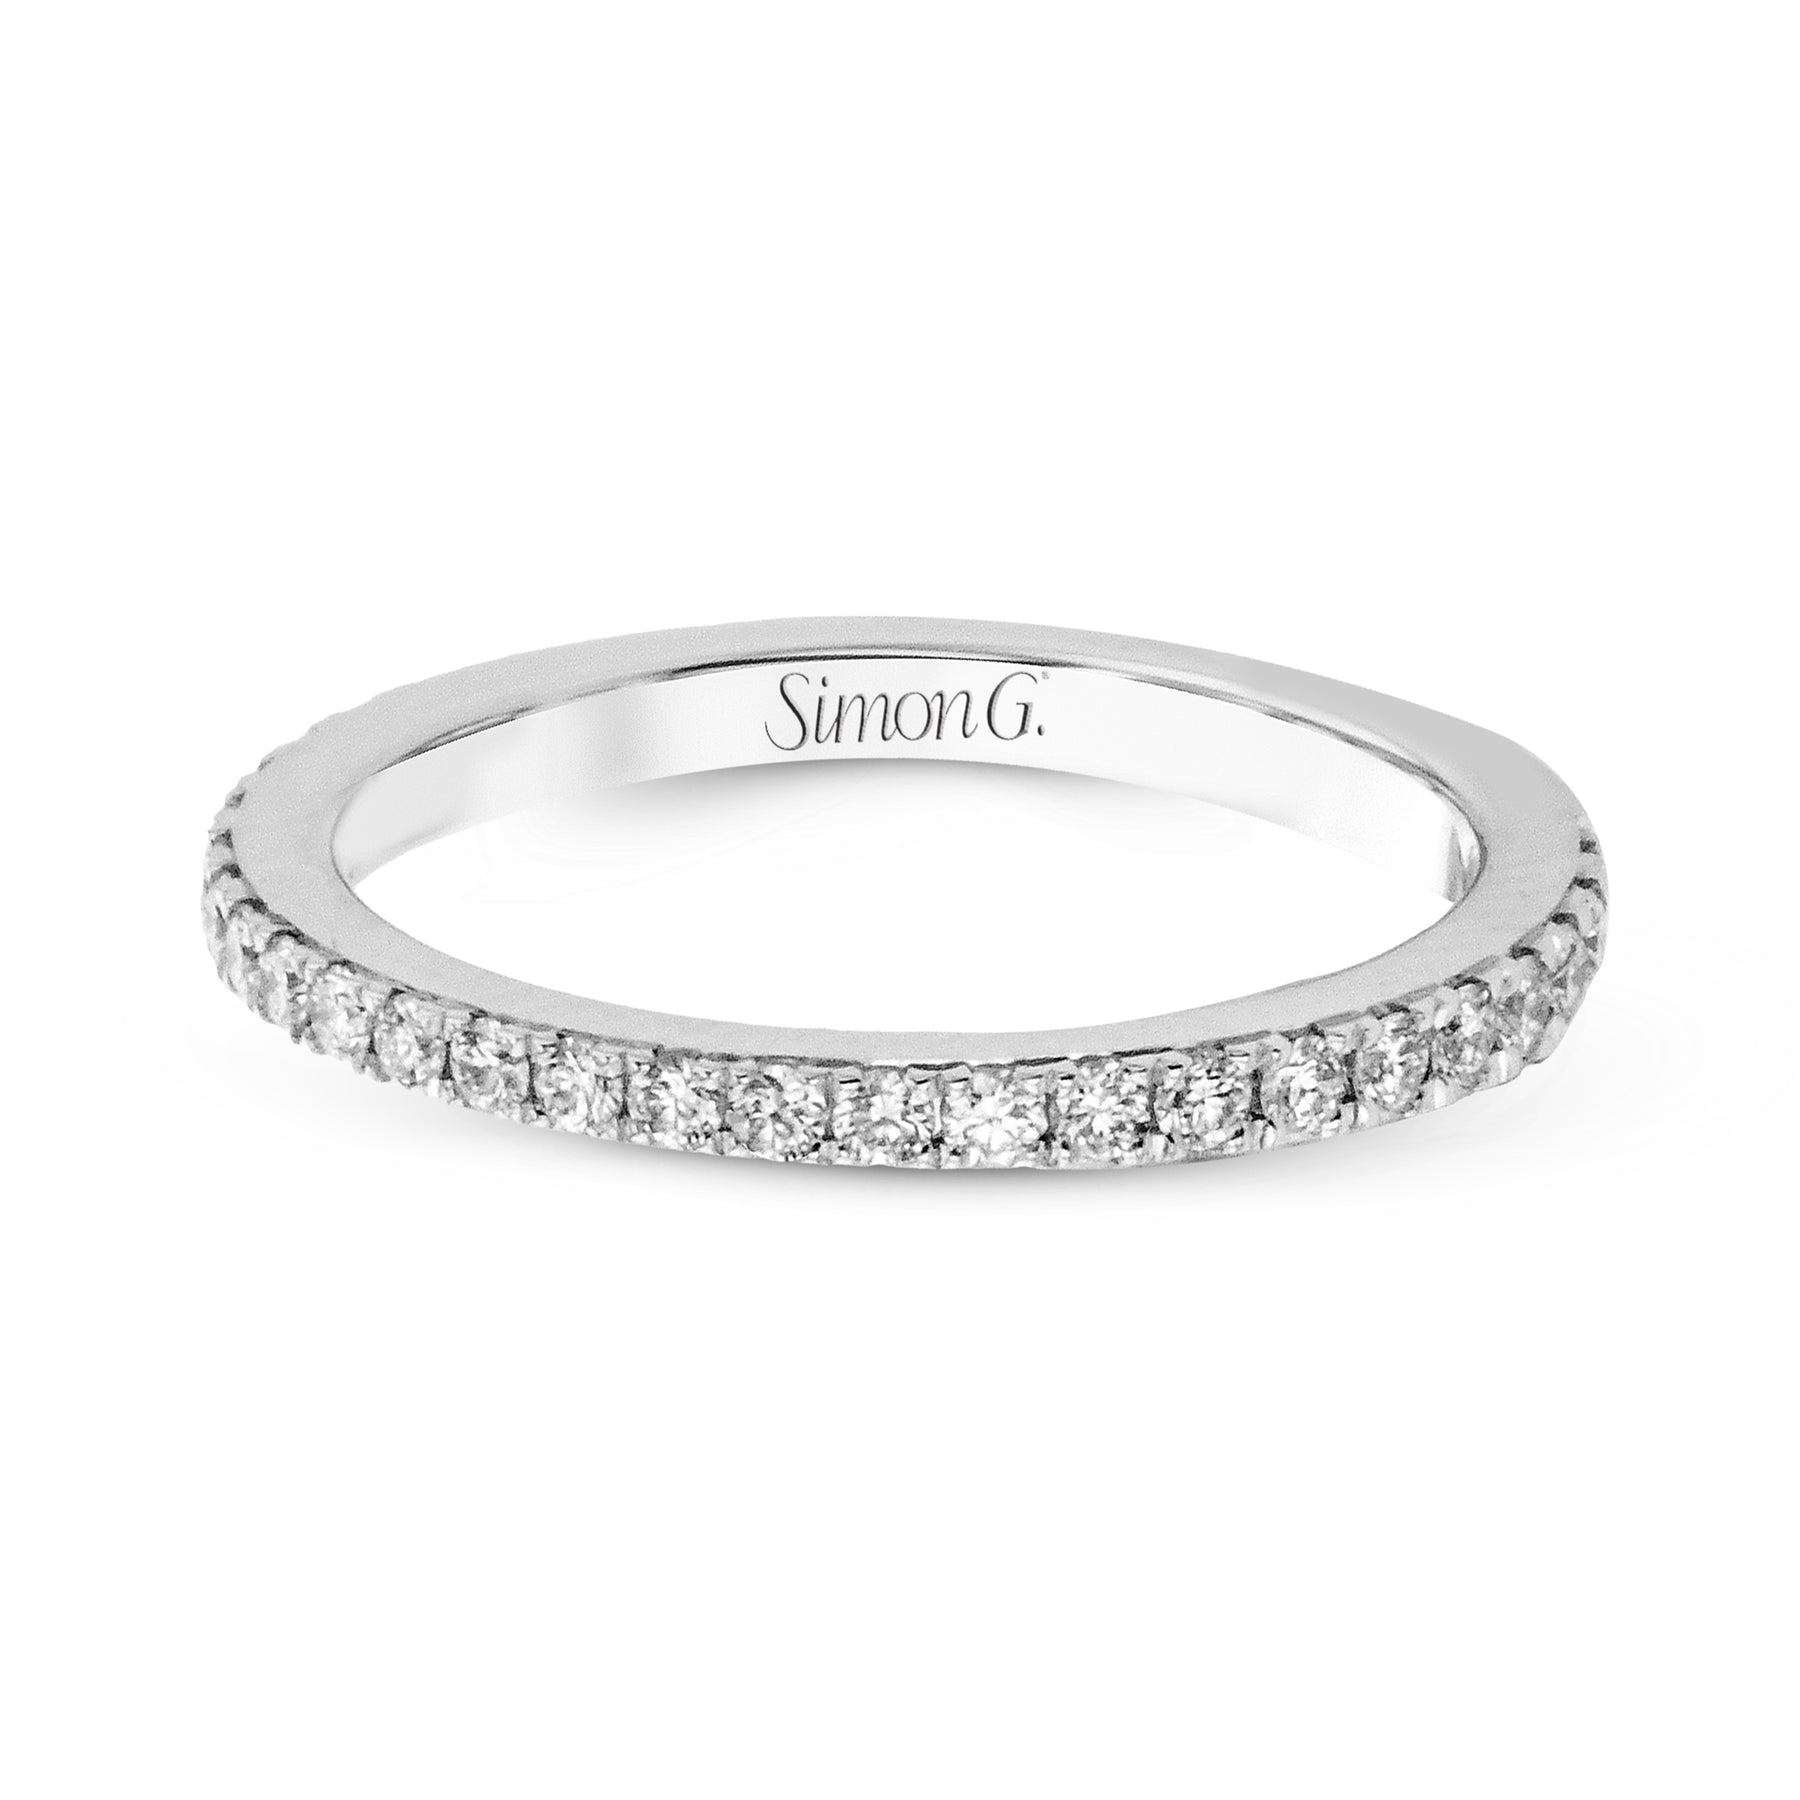 Eternity Wedding Band in 18k Gold with Diamonds MR1840-A-B-ET